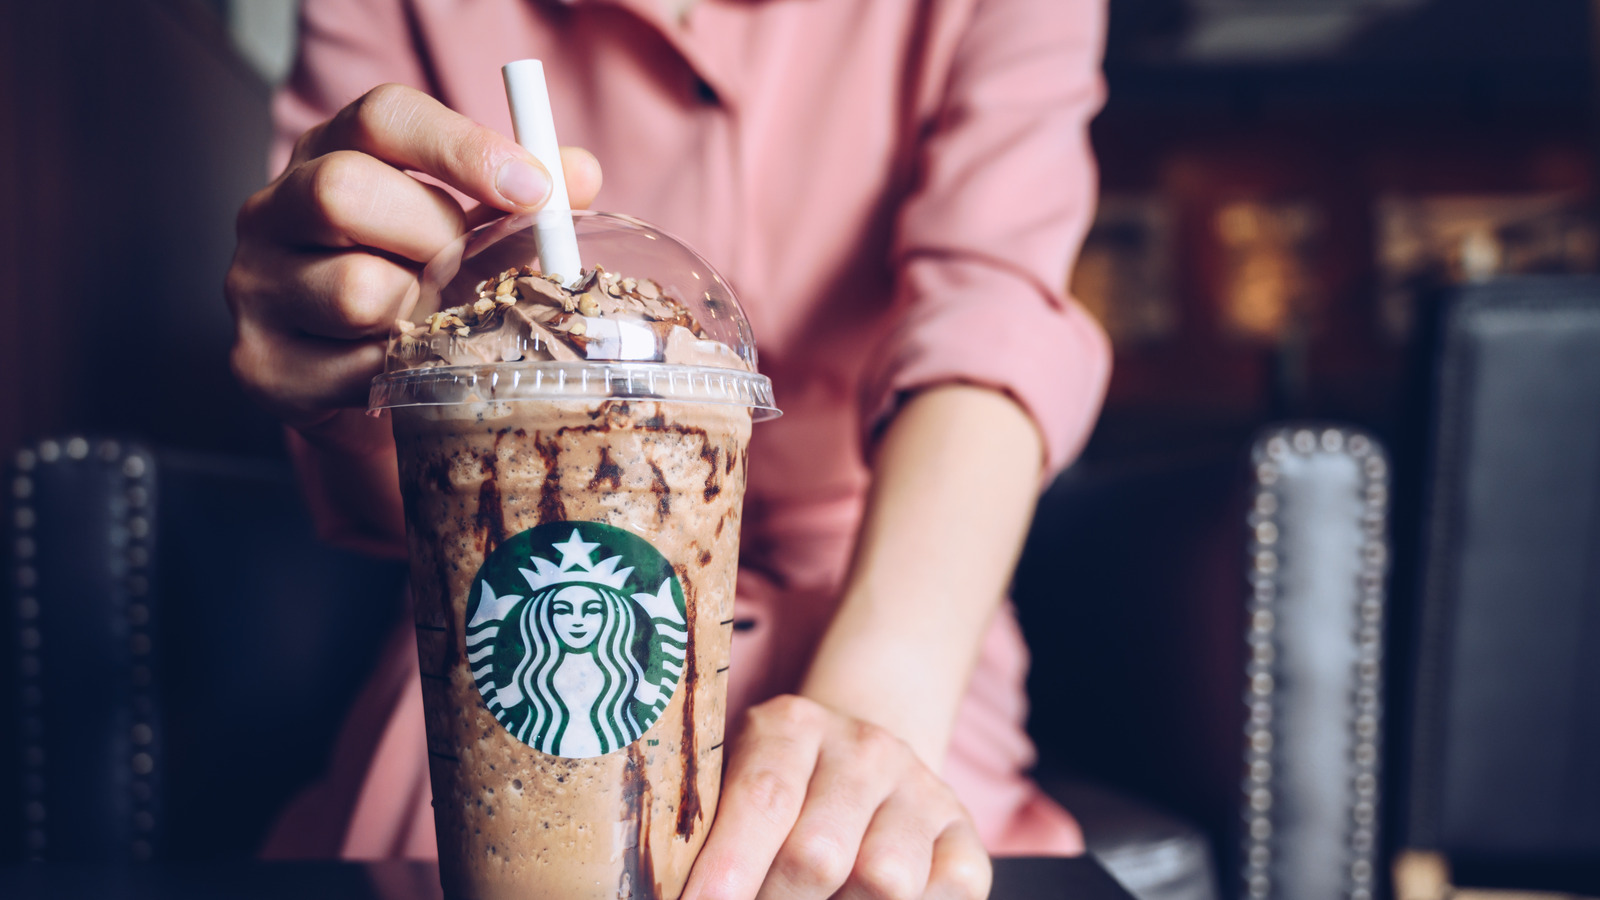 How To Order A Healthier Starbucks Drink, According To Our Dietitian - Health Digest